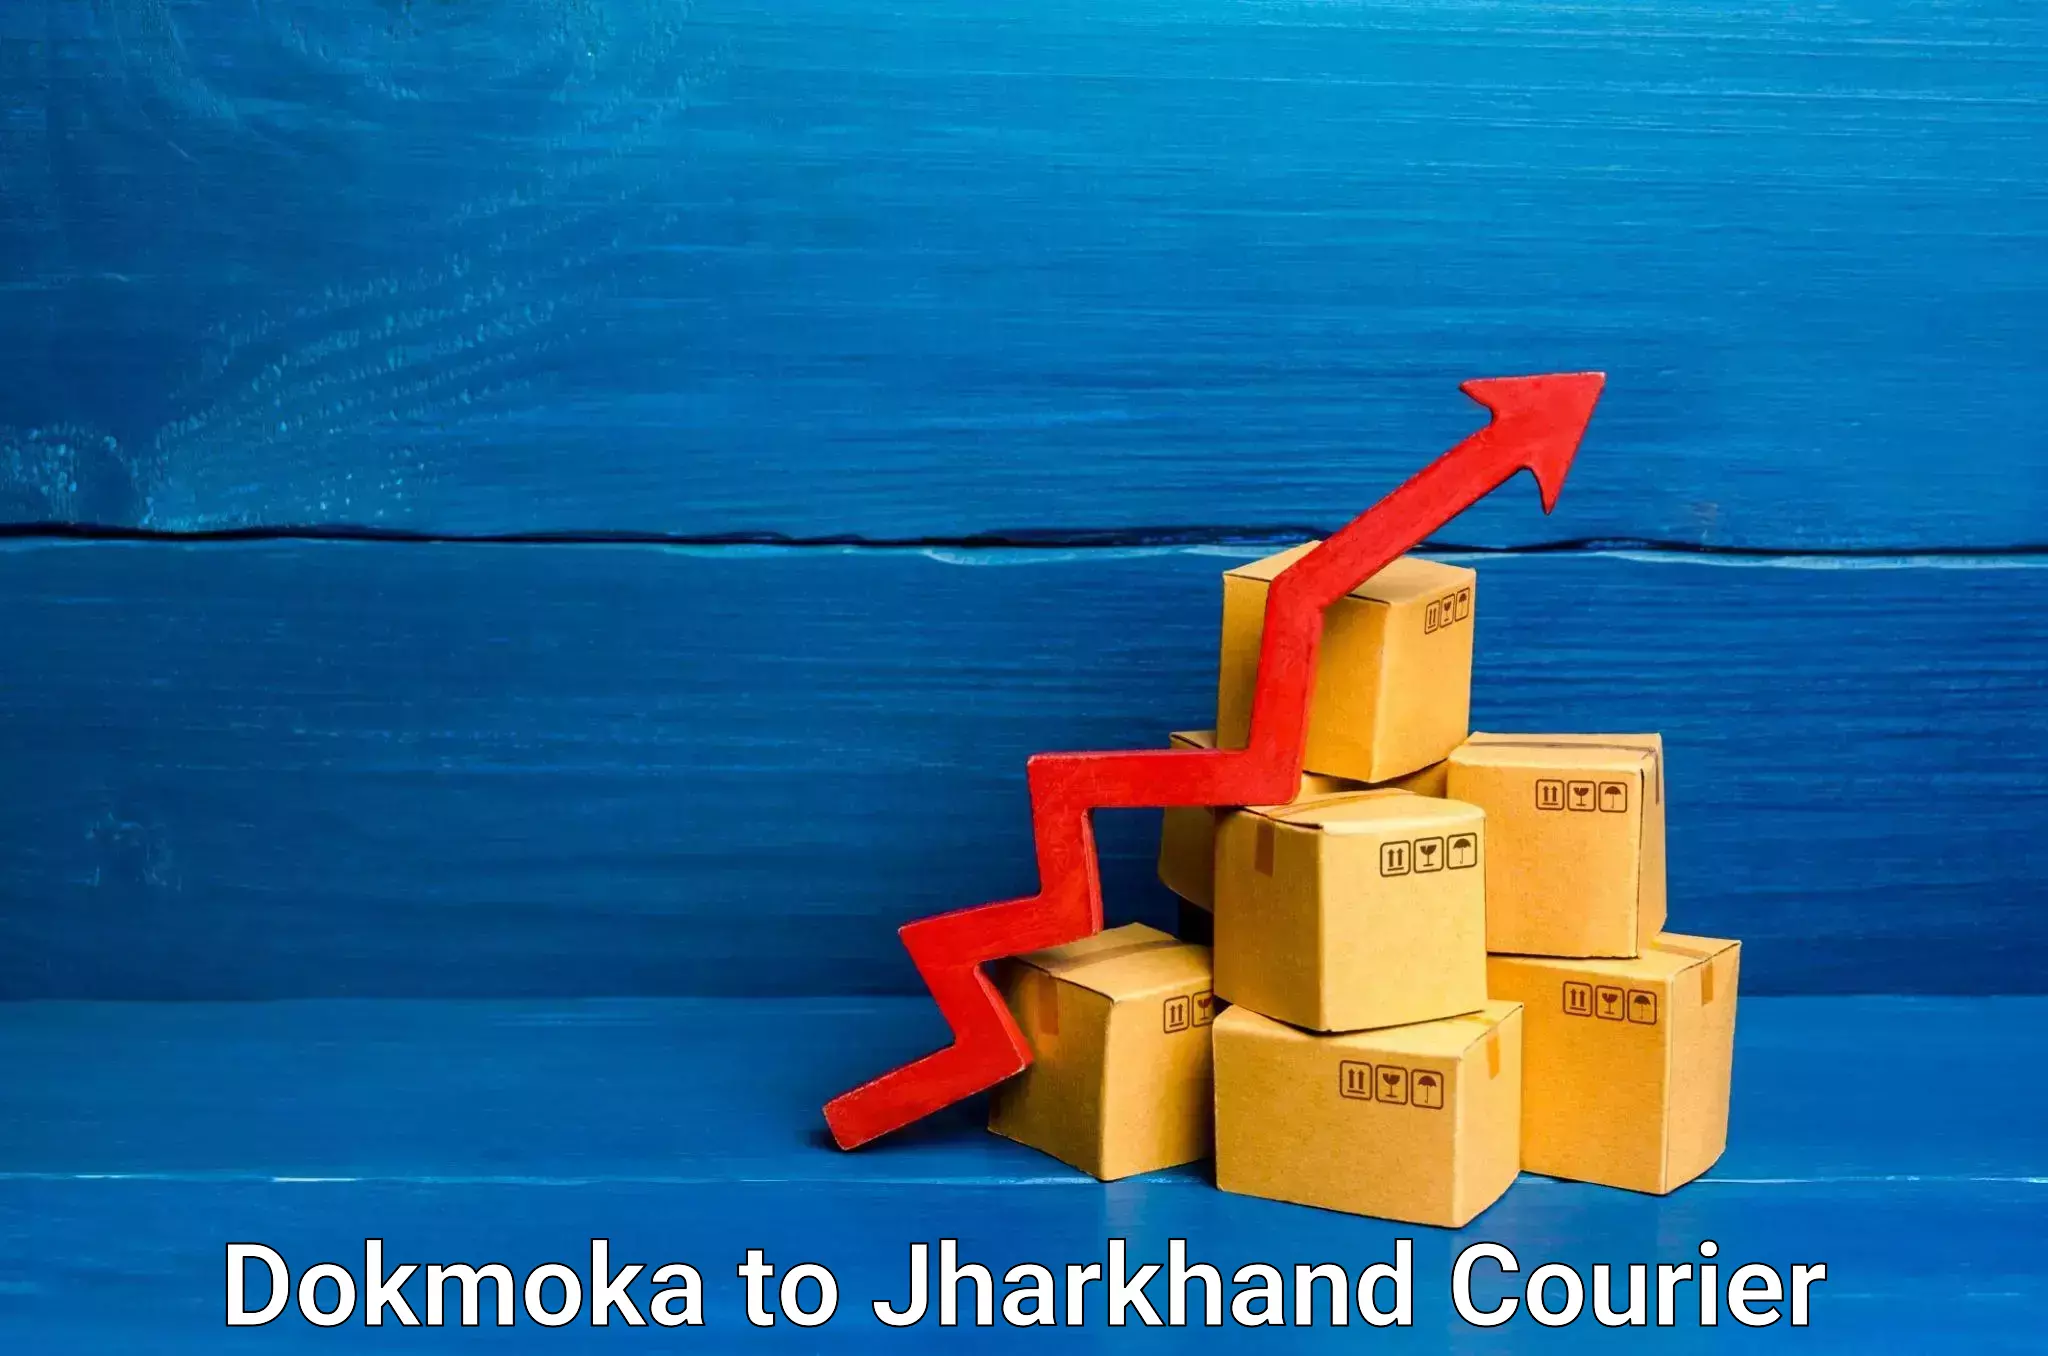 Package delivery network Dokmoka to Dhanbad